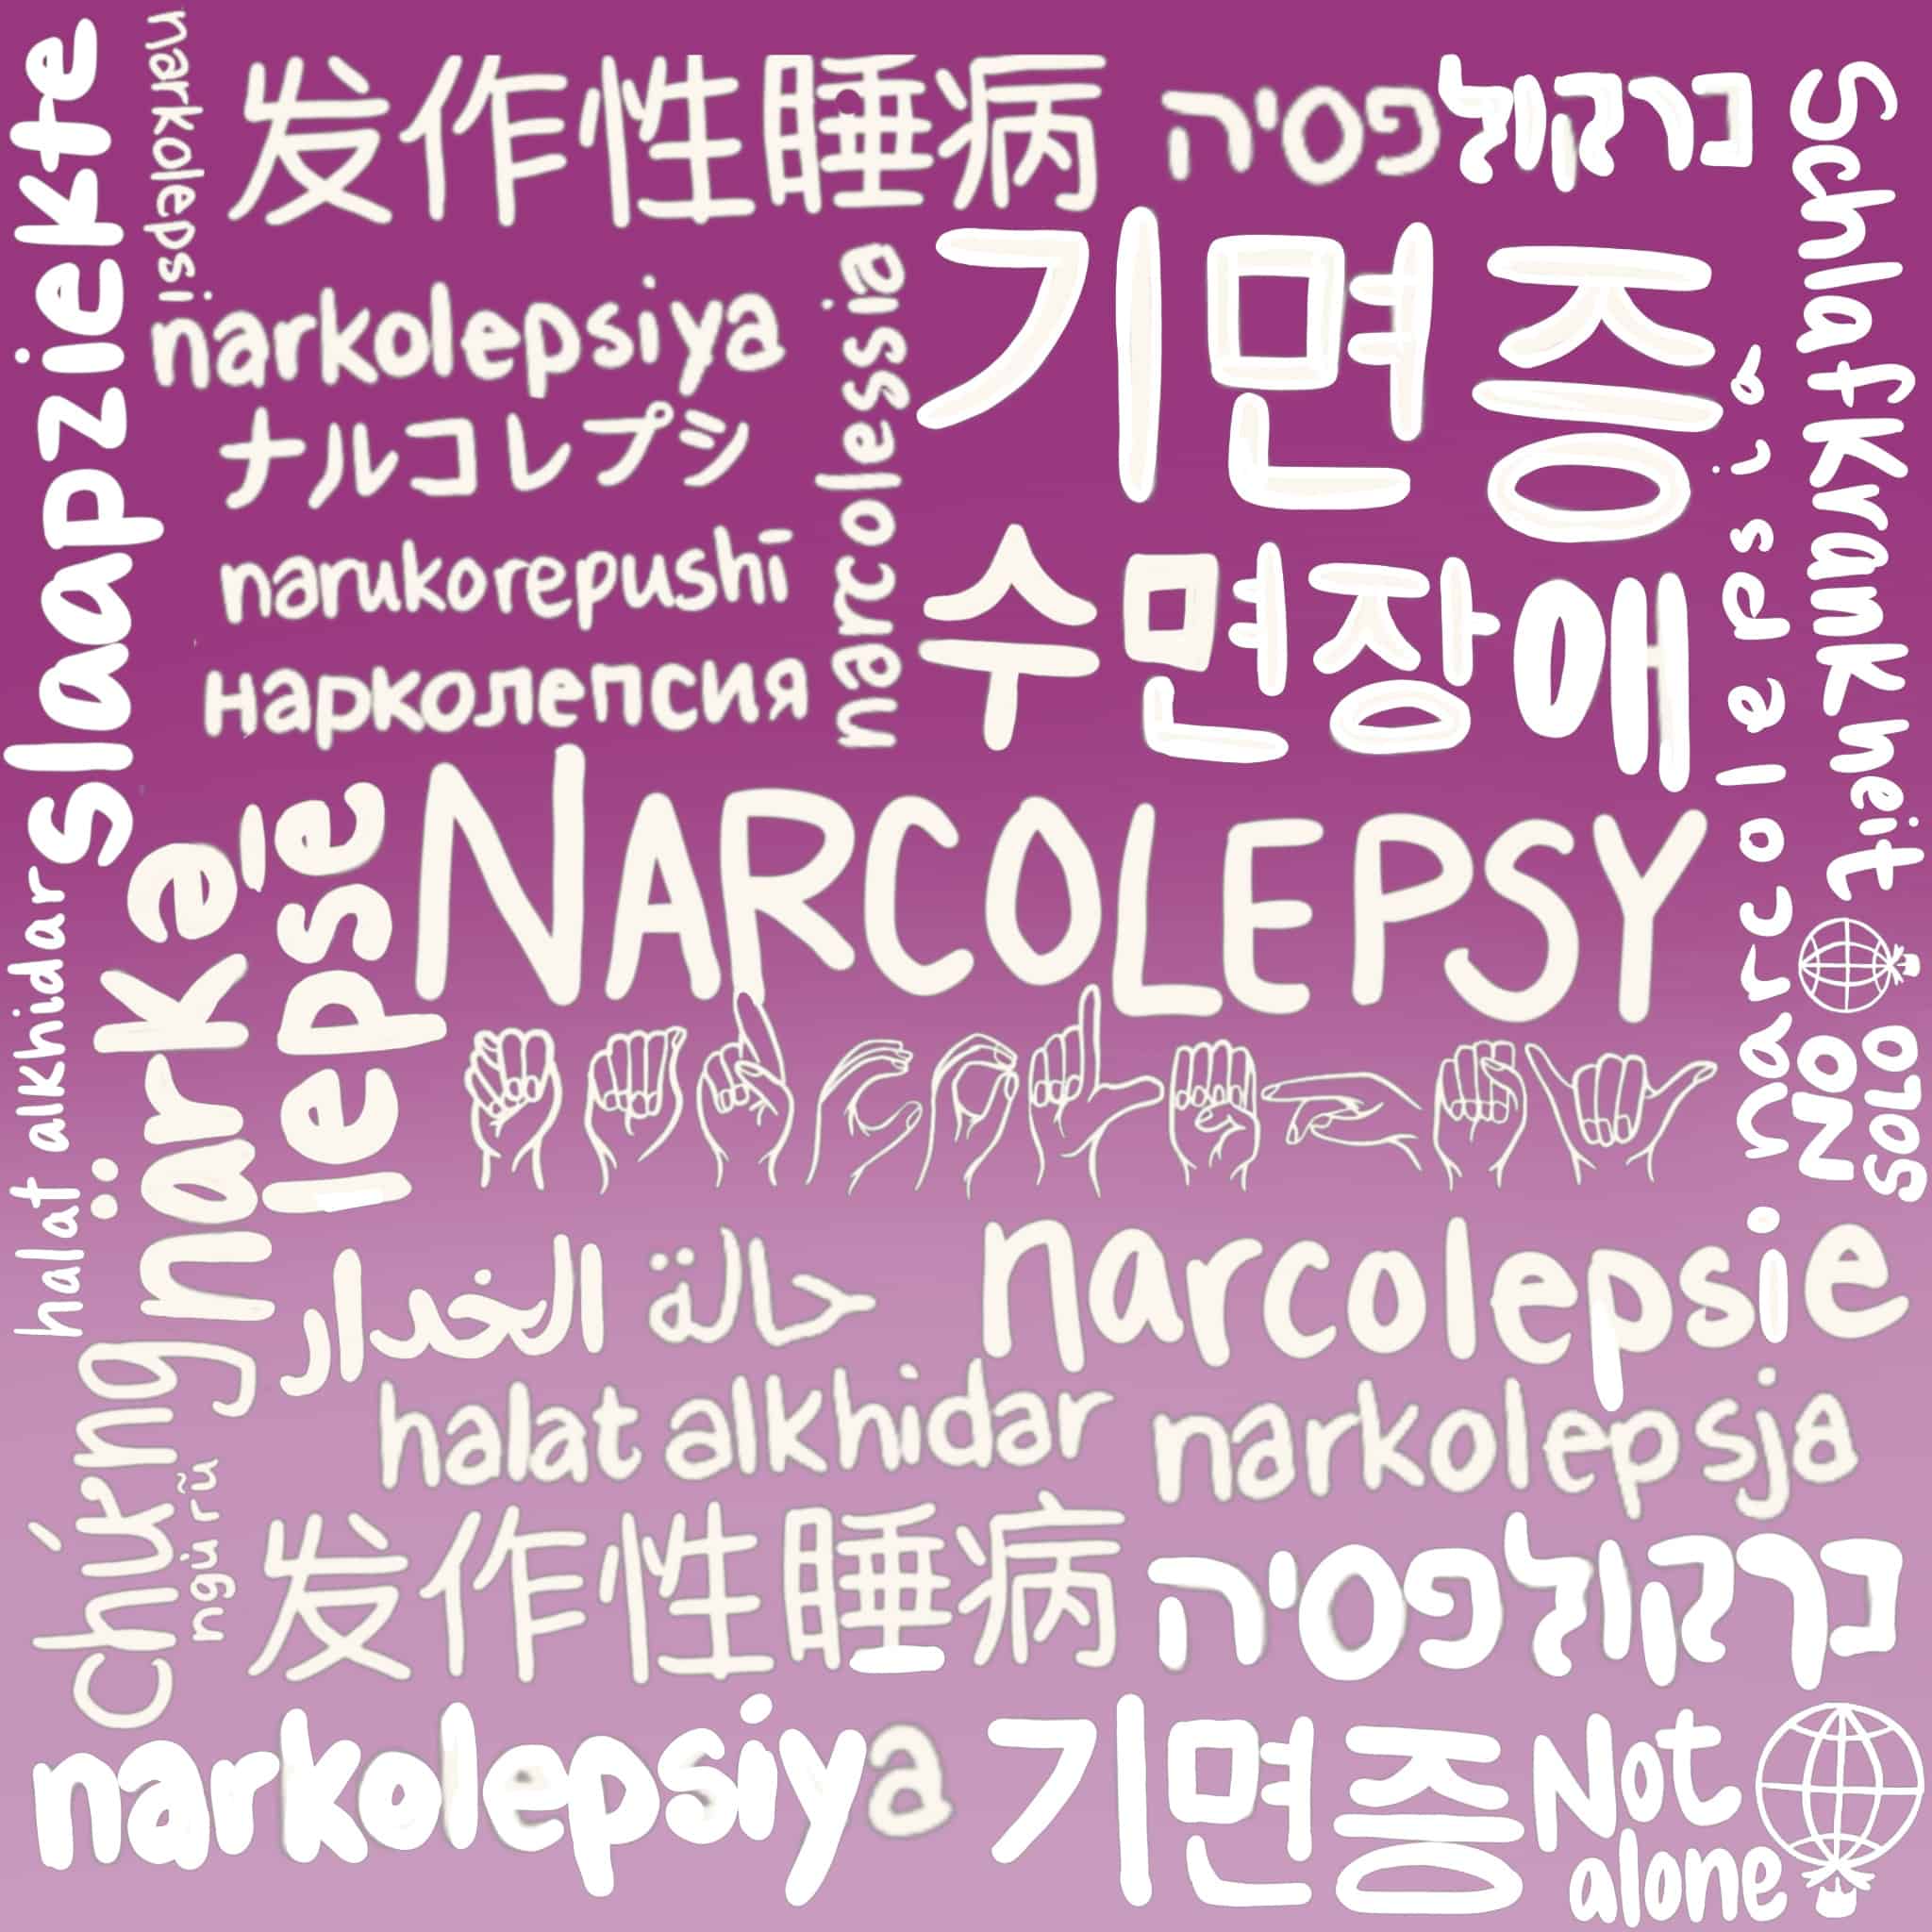 narcolepsy in world languages in purple